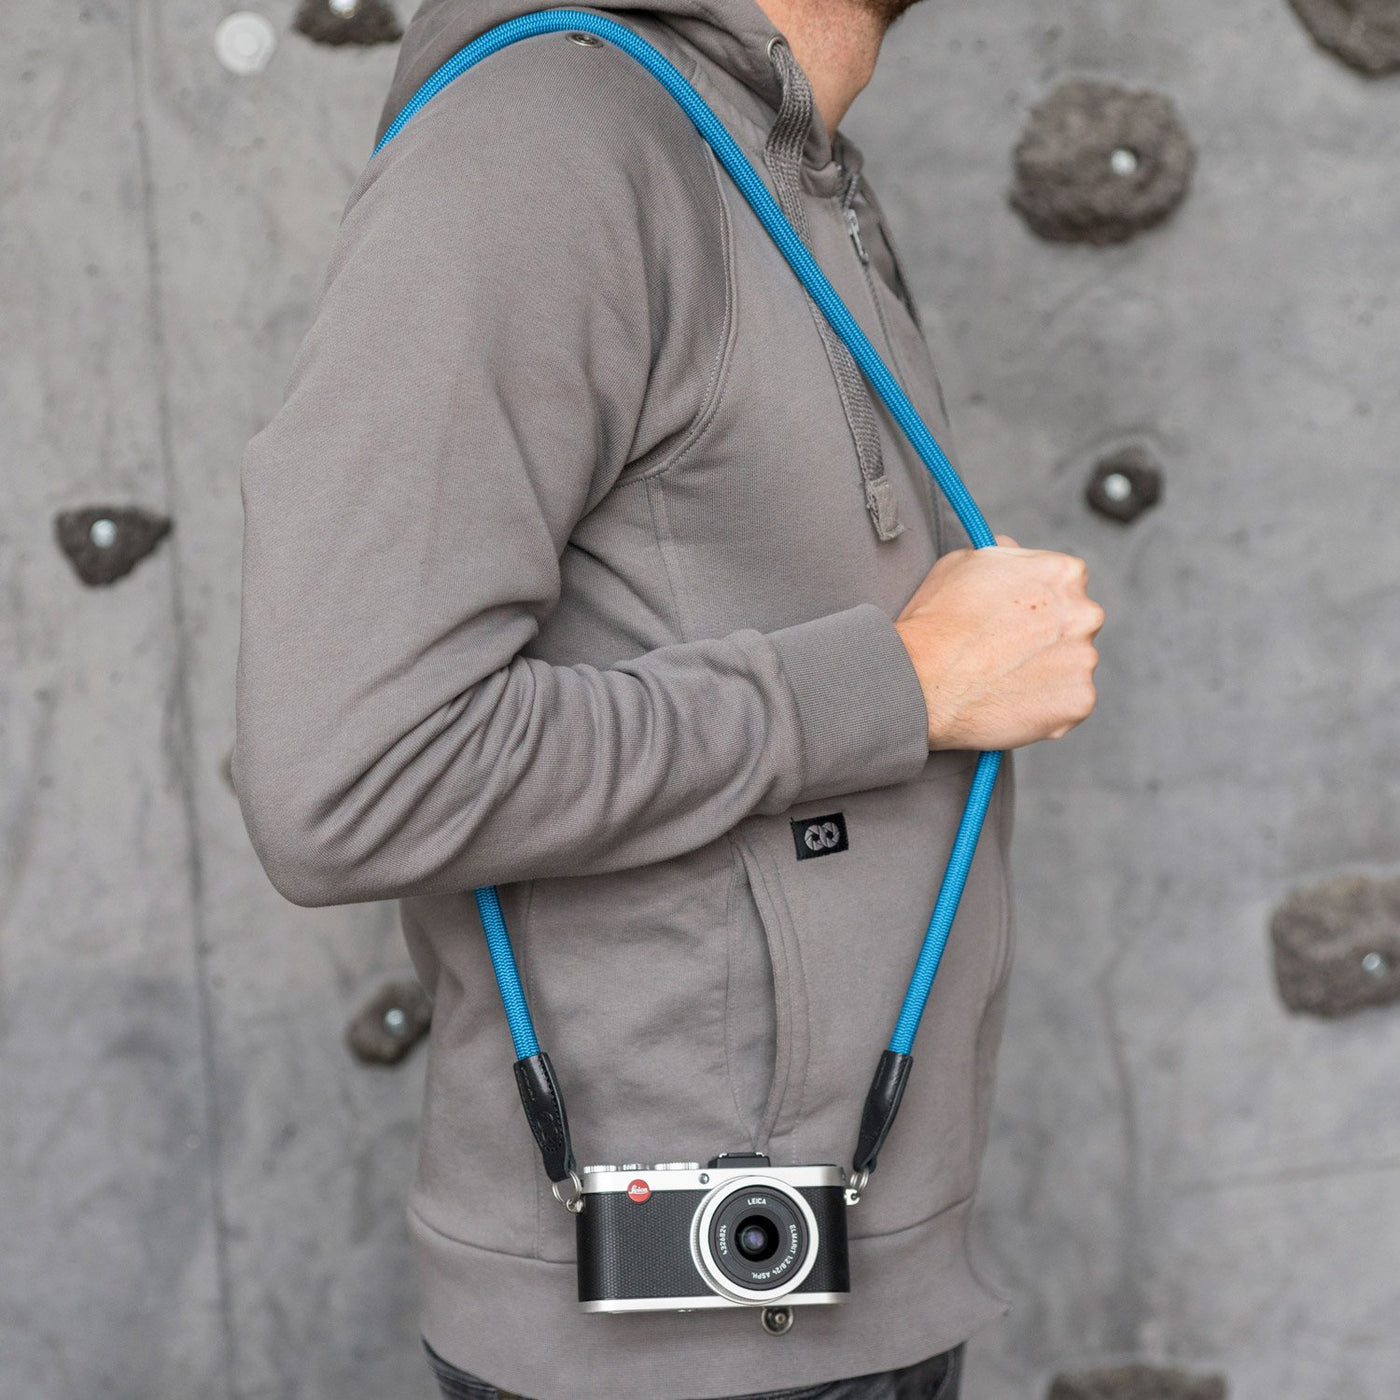 Leica camera on a photographer's hip held with blue rope strap 